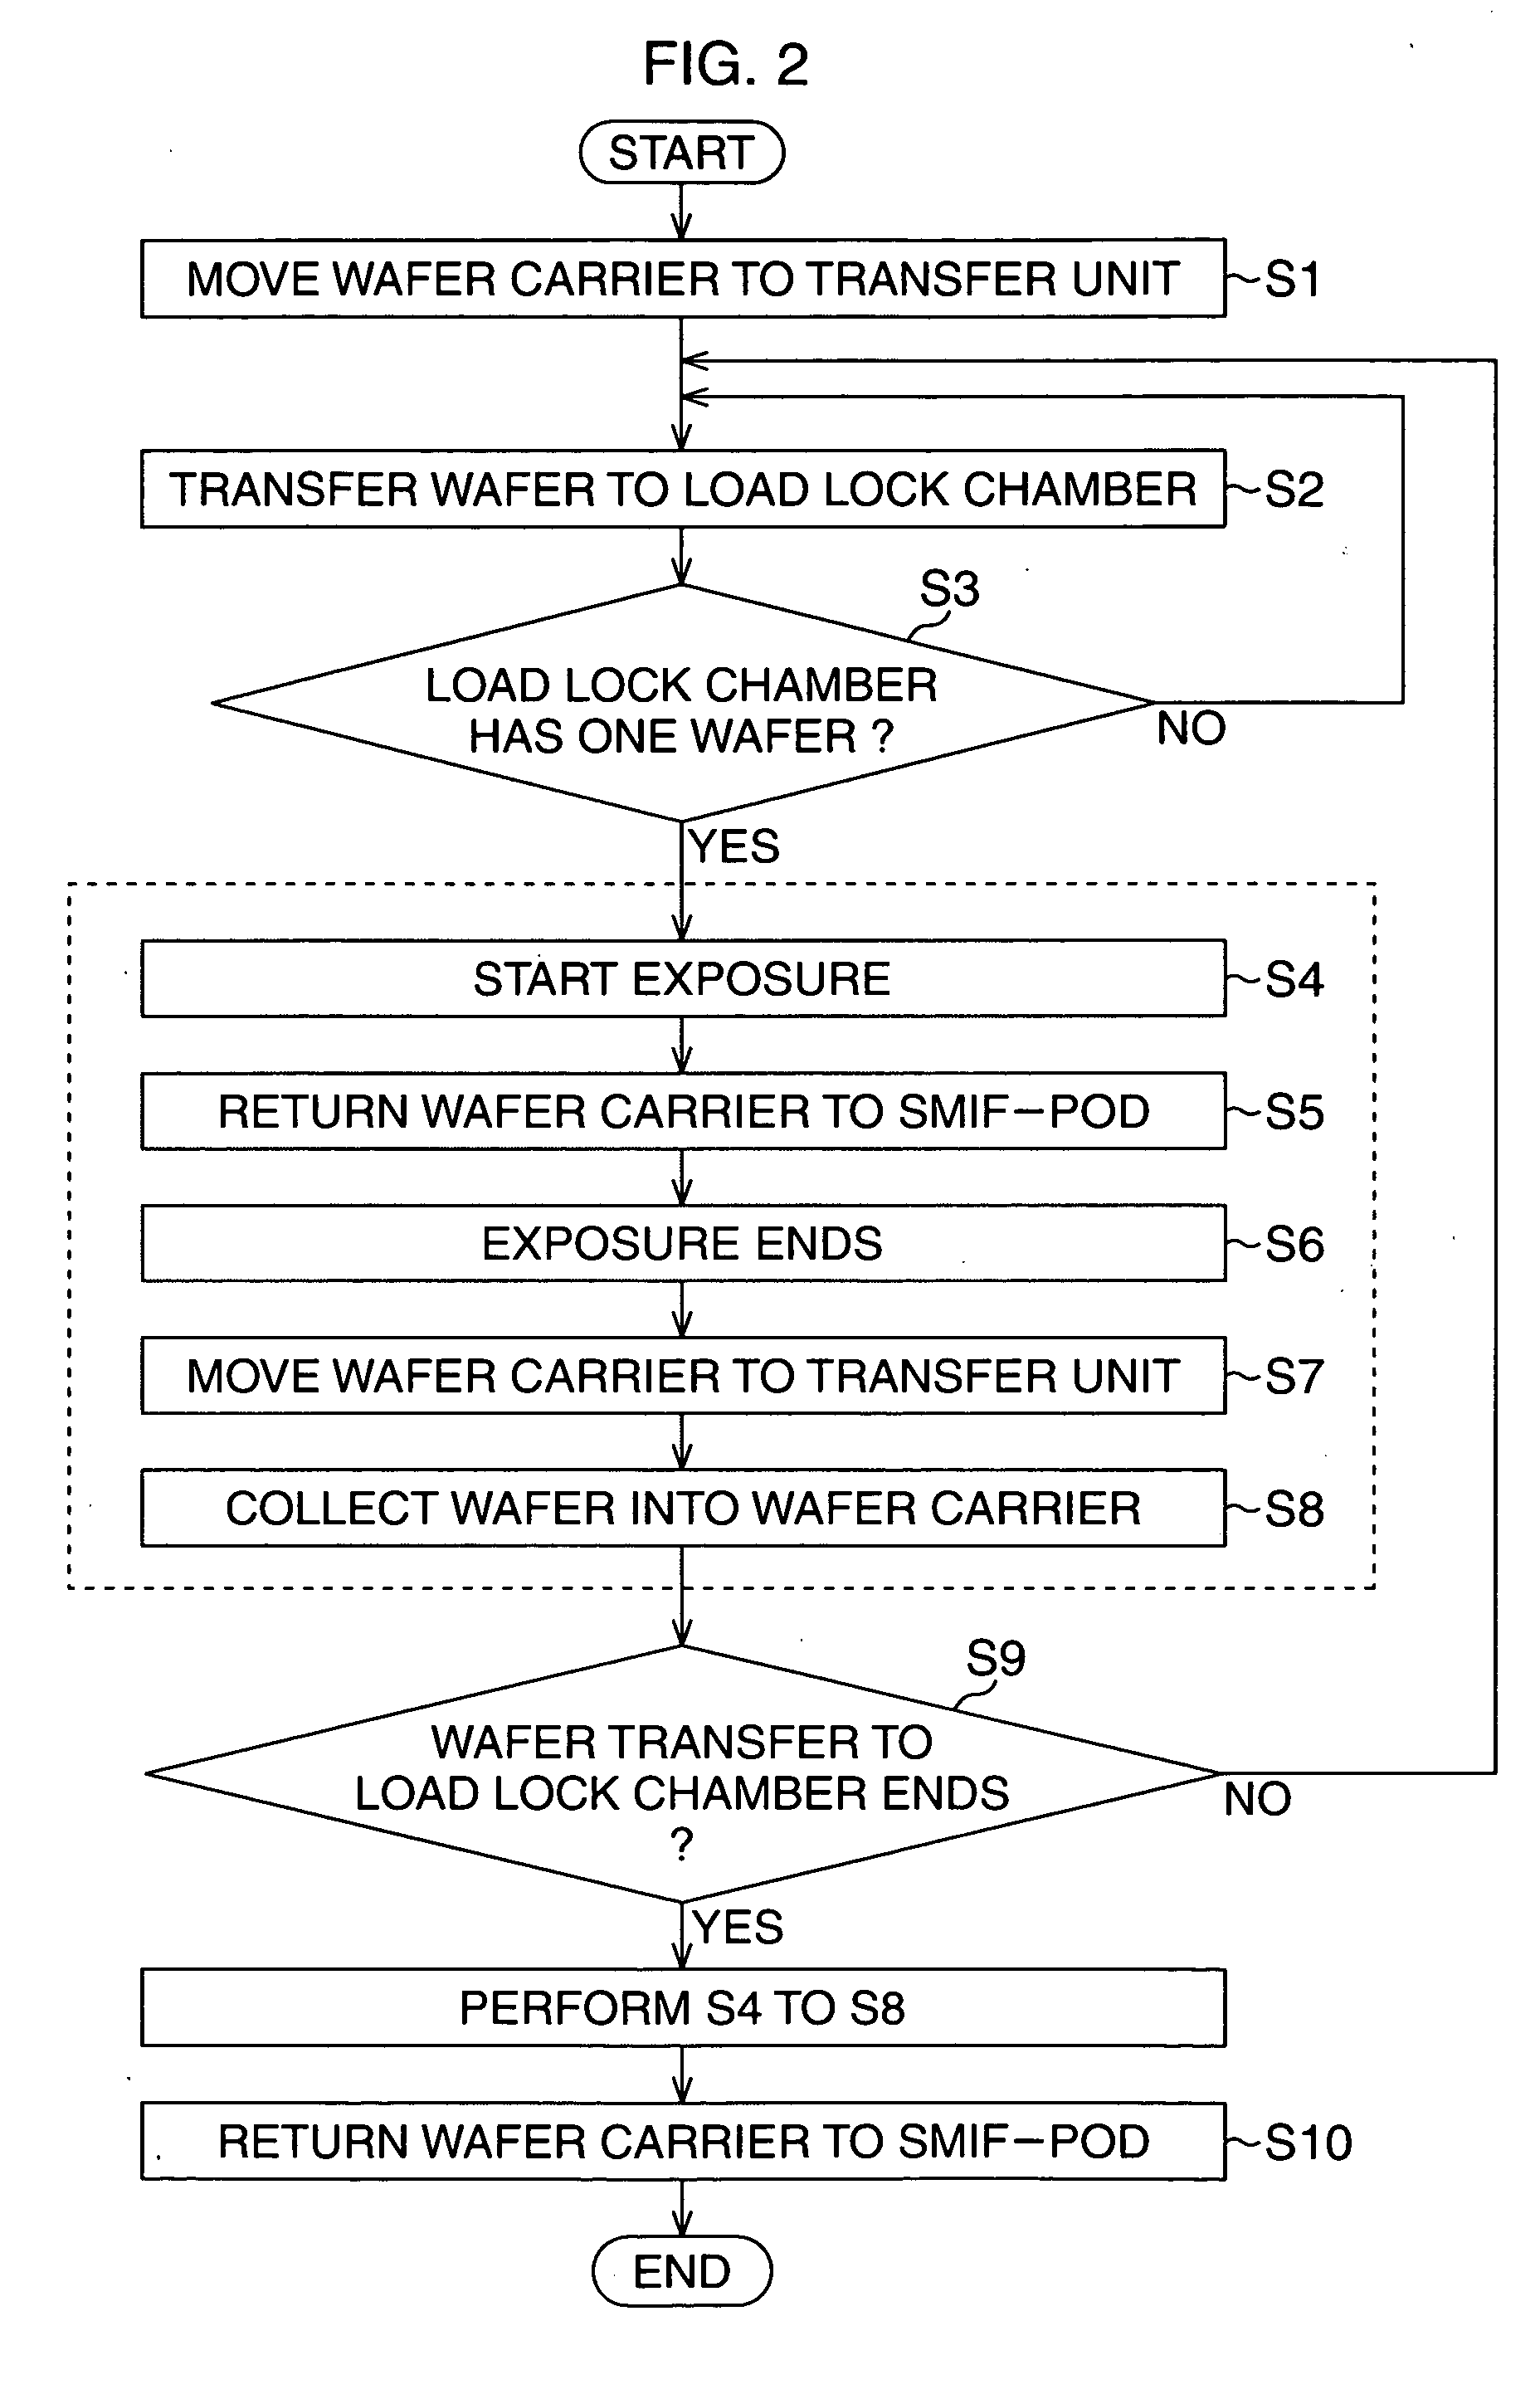 Exposure equipment and control method of the same